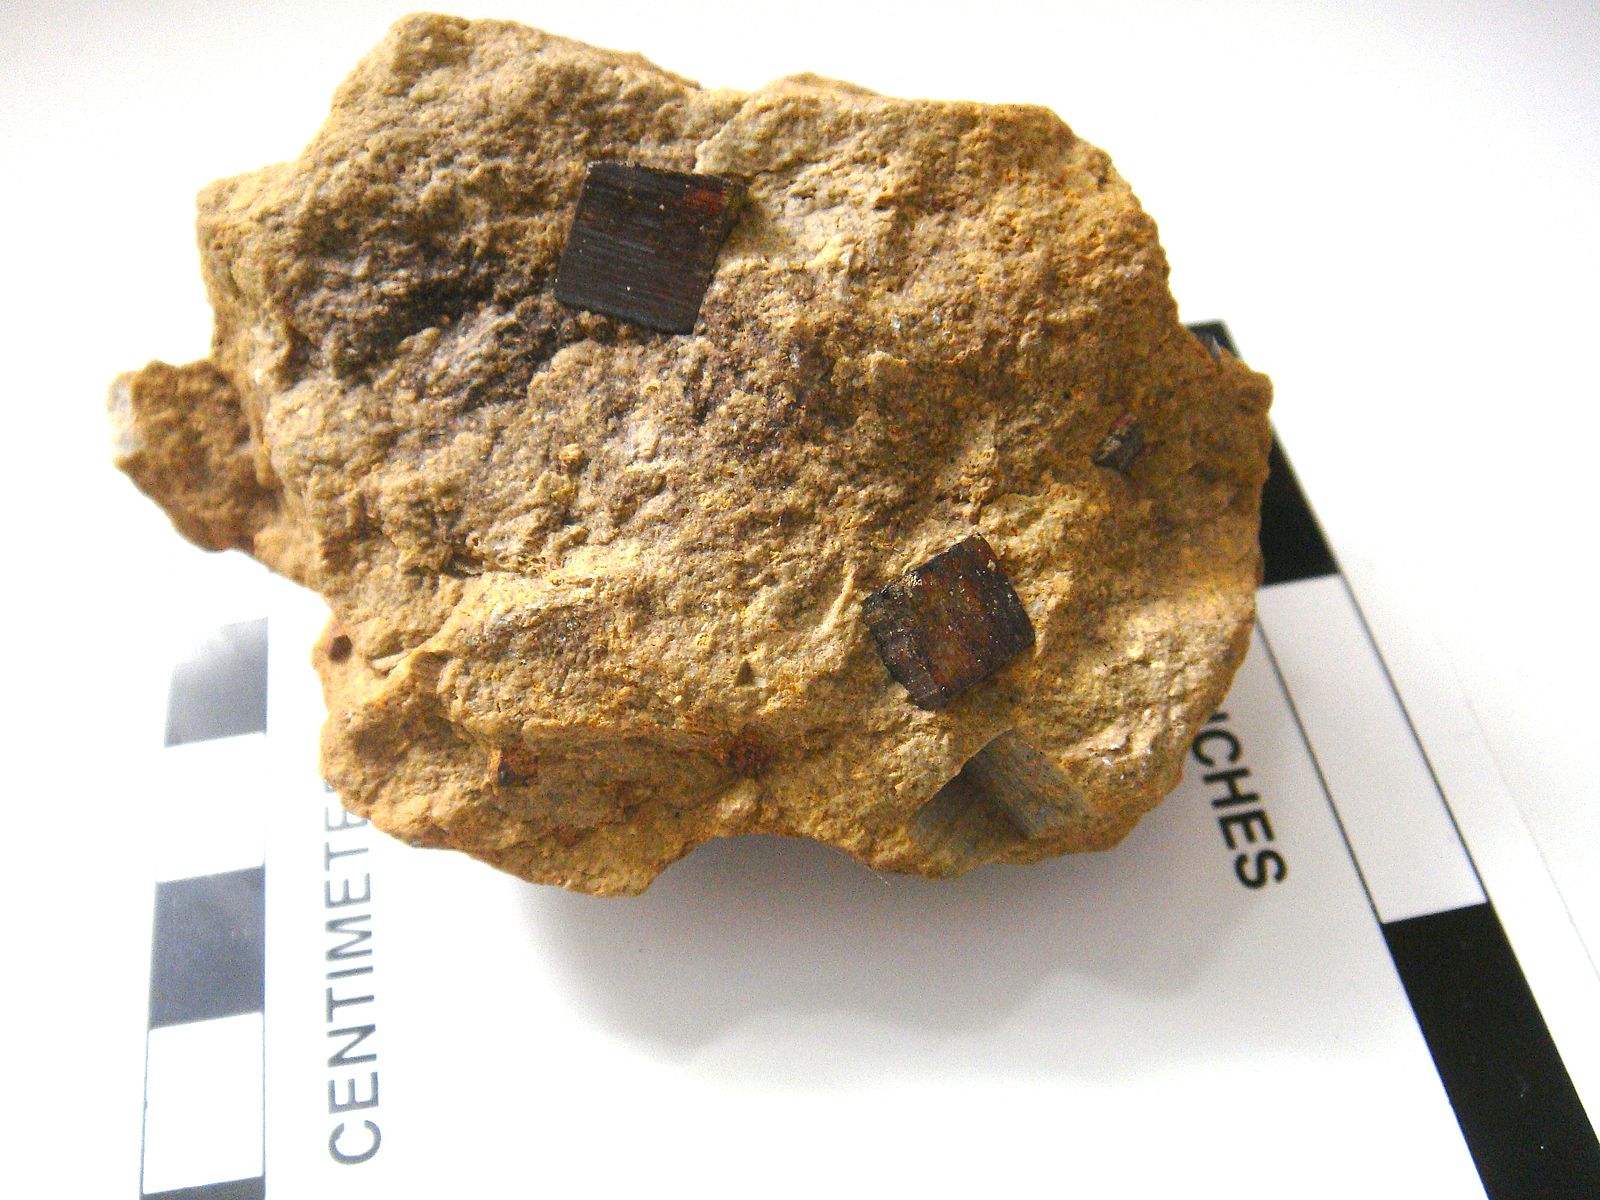 Goethite is in cubes, though it usually is not. Pyrite is in cubes.